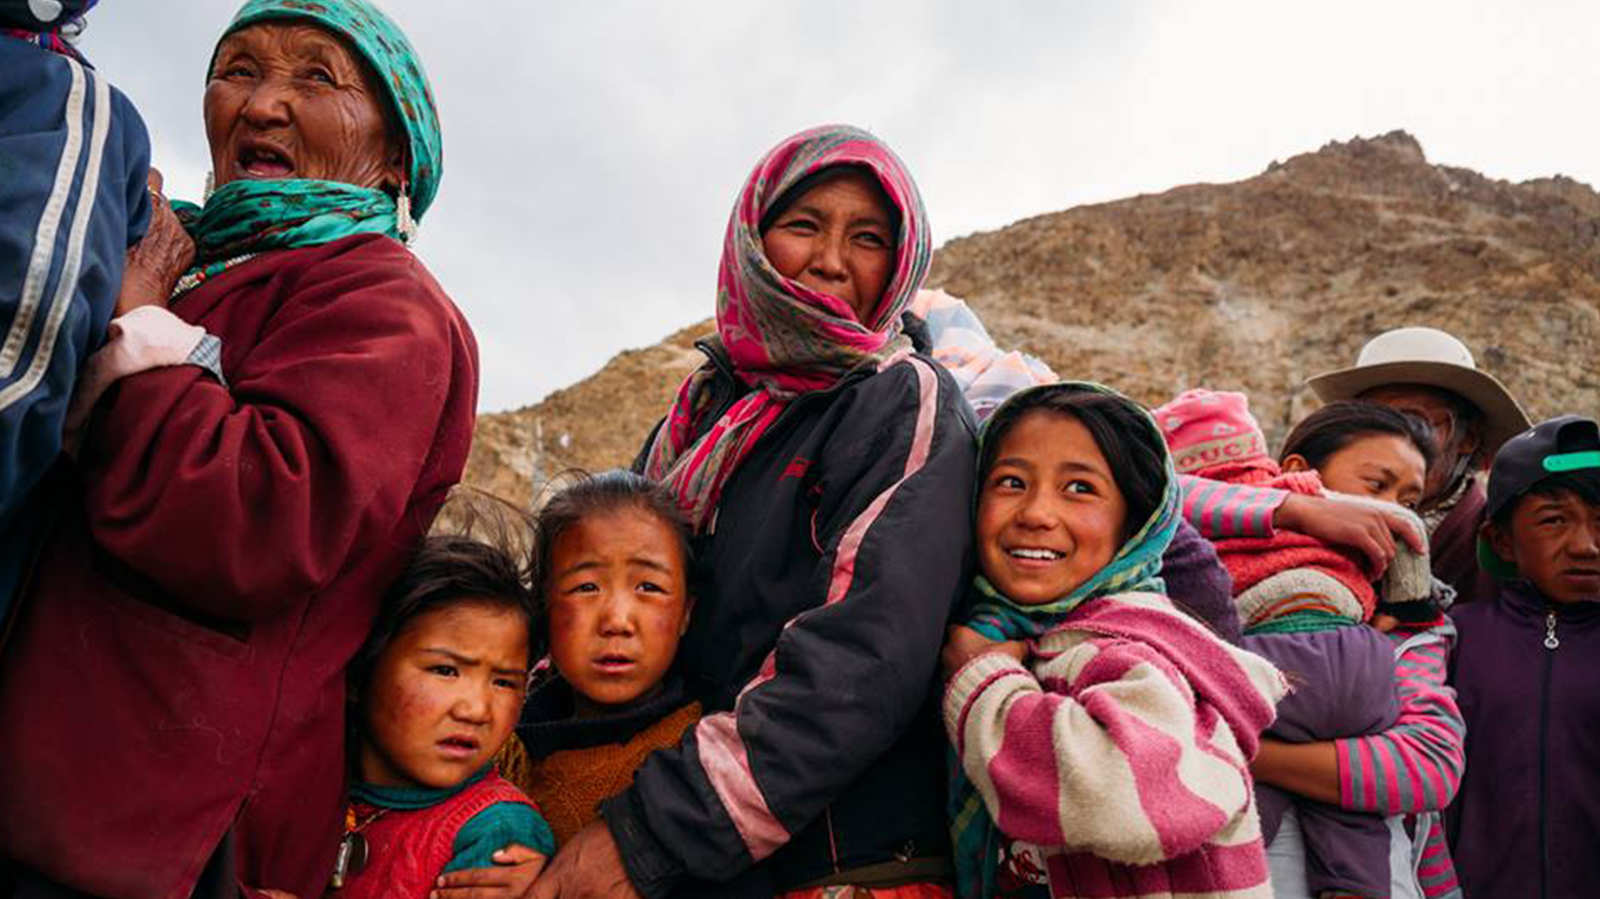 Bringing the gift of sight to the Himalayas